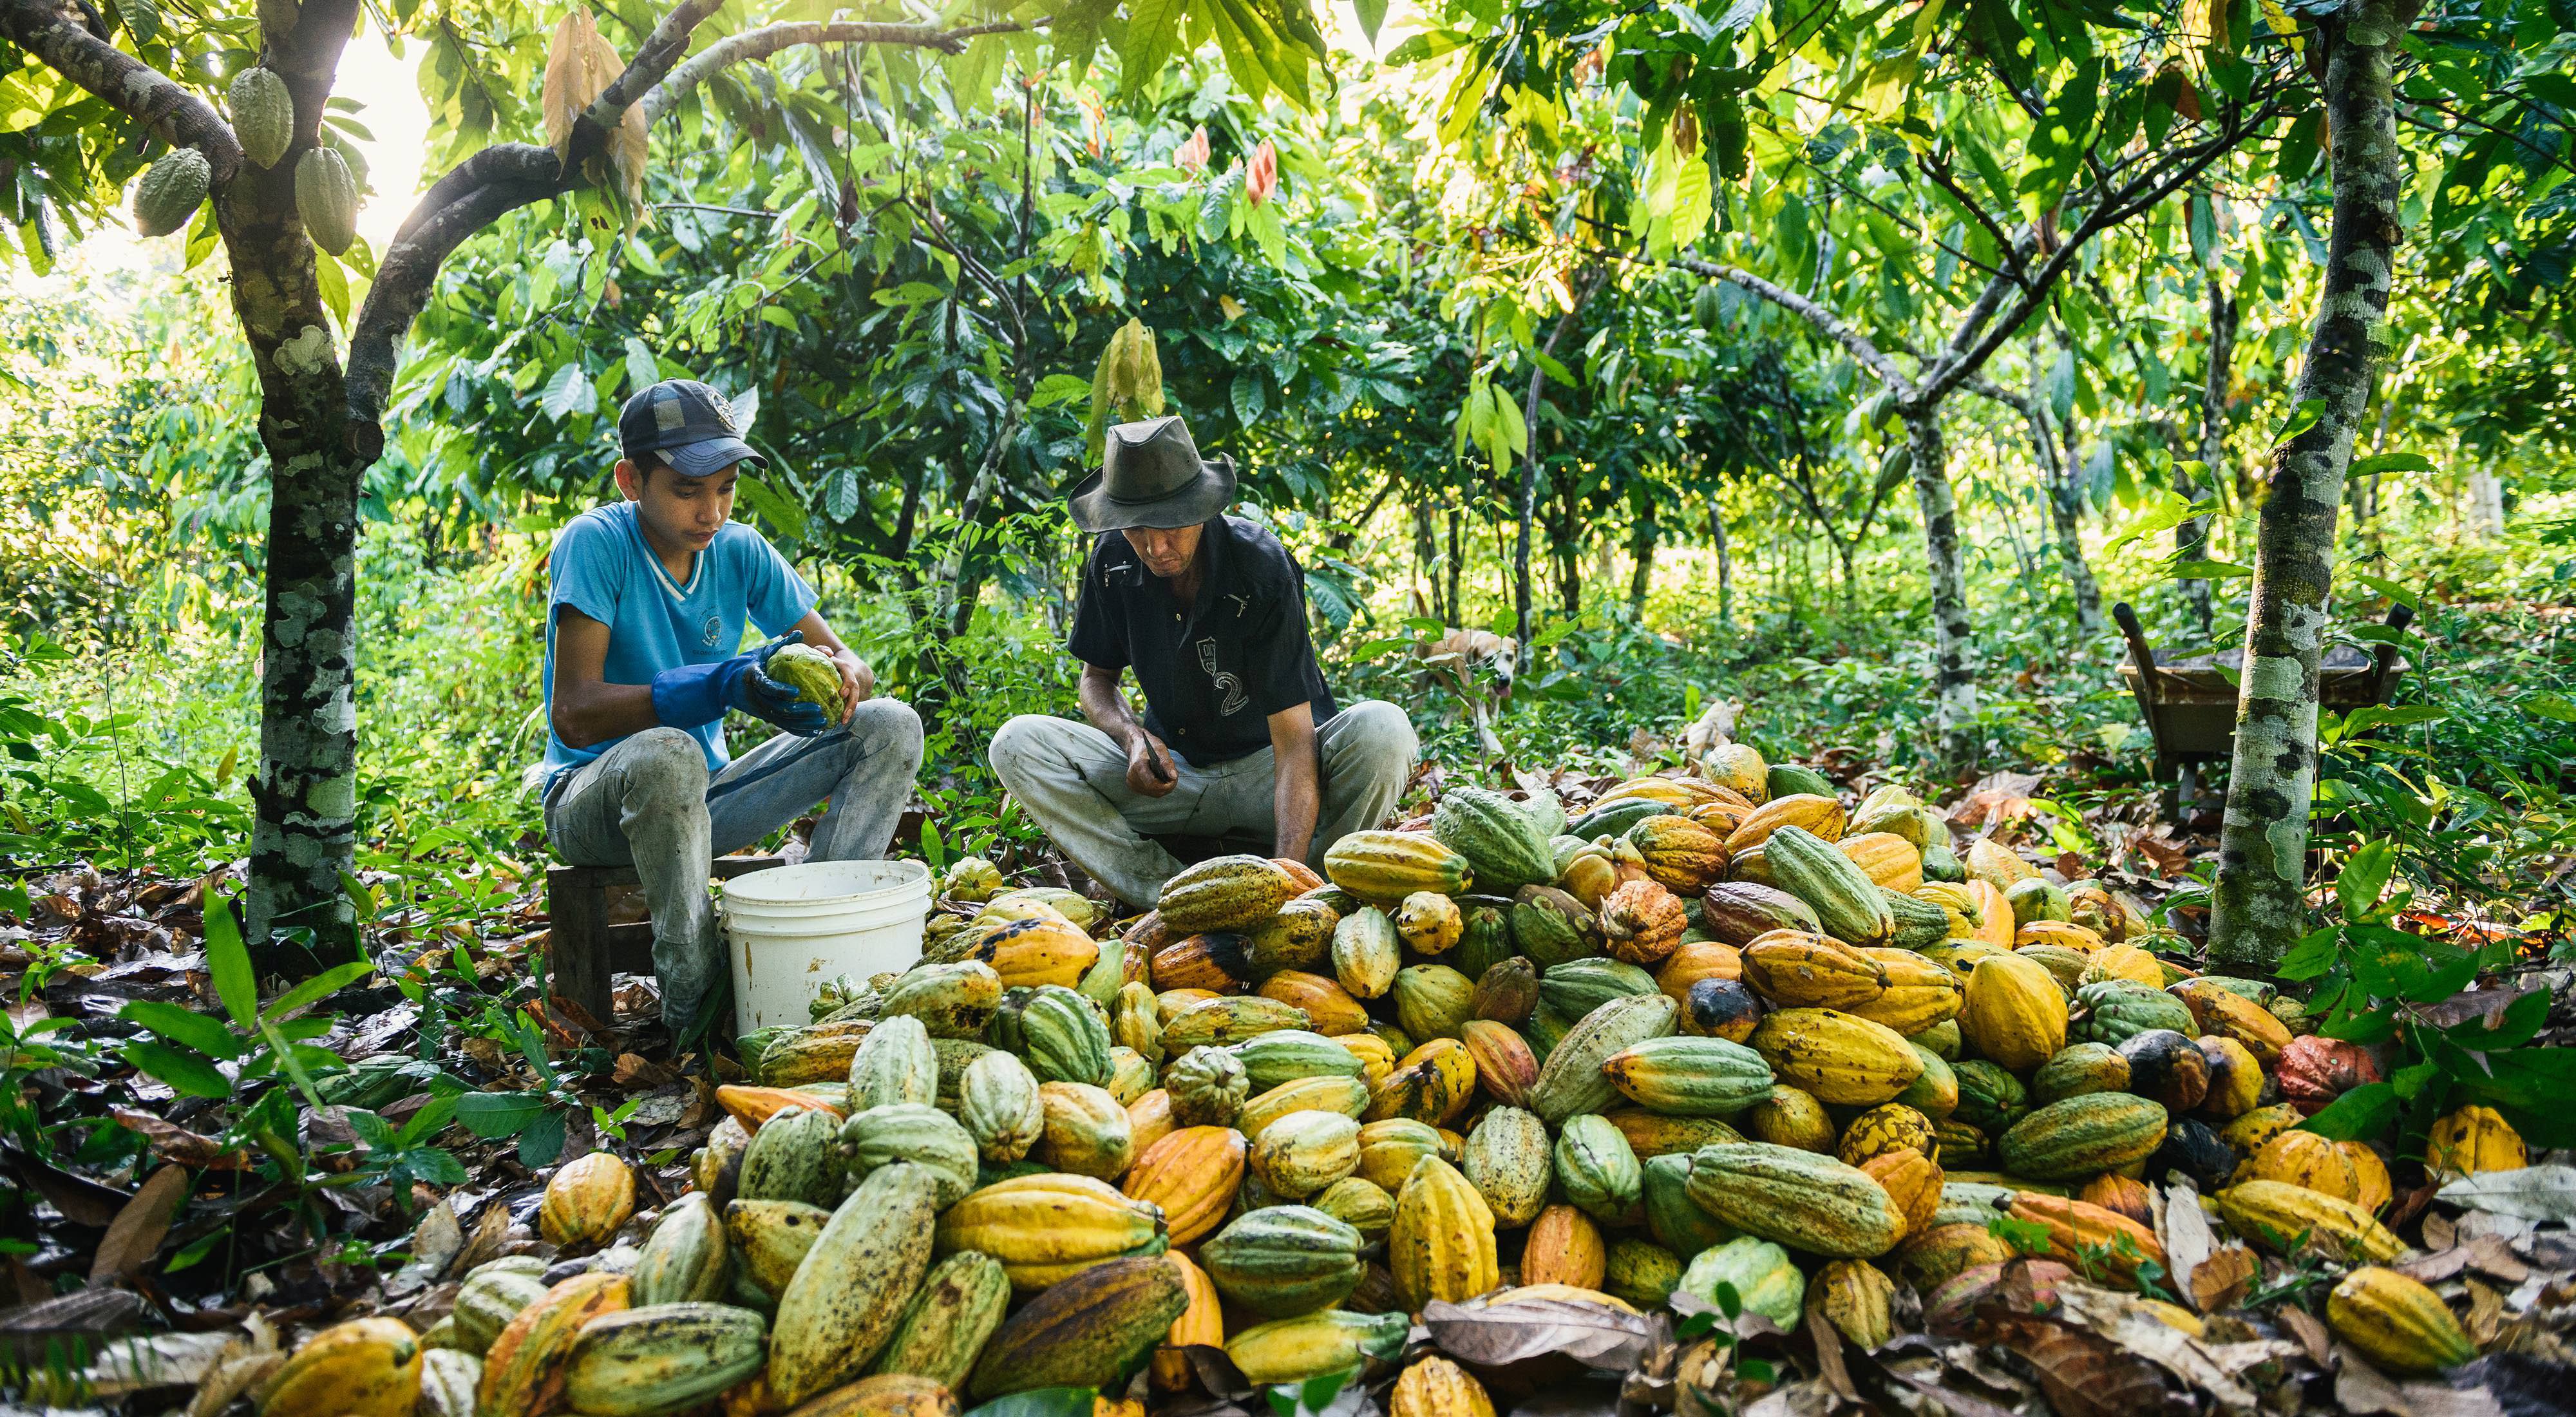 Deniston Mariano Dutra and his son Matheus remove cacao seeds from their pods on thir São Félix do Xingu ranch. The Nature Conservancy innovation is enabling compliance with Brazil’s progressive Forest Code, while increasing economic opportunity.